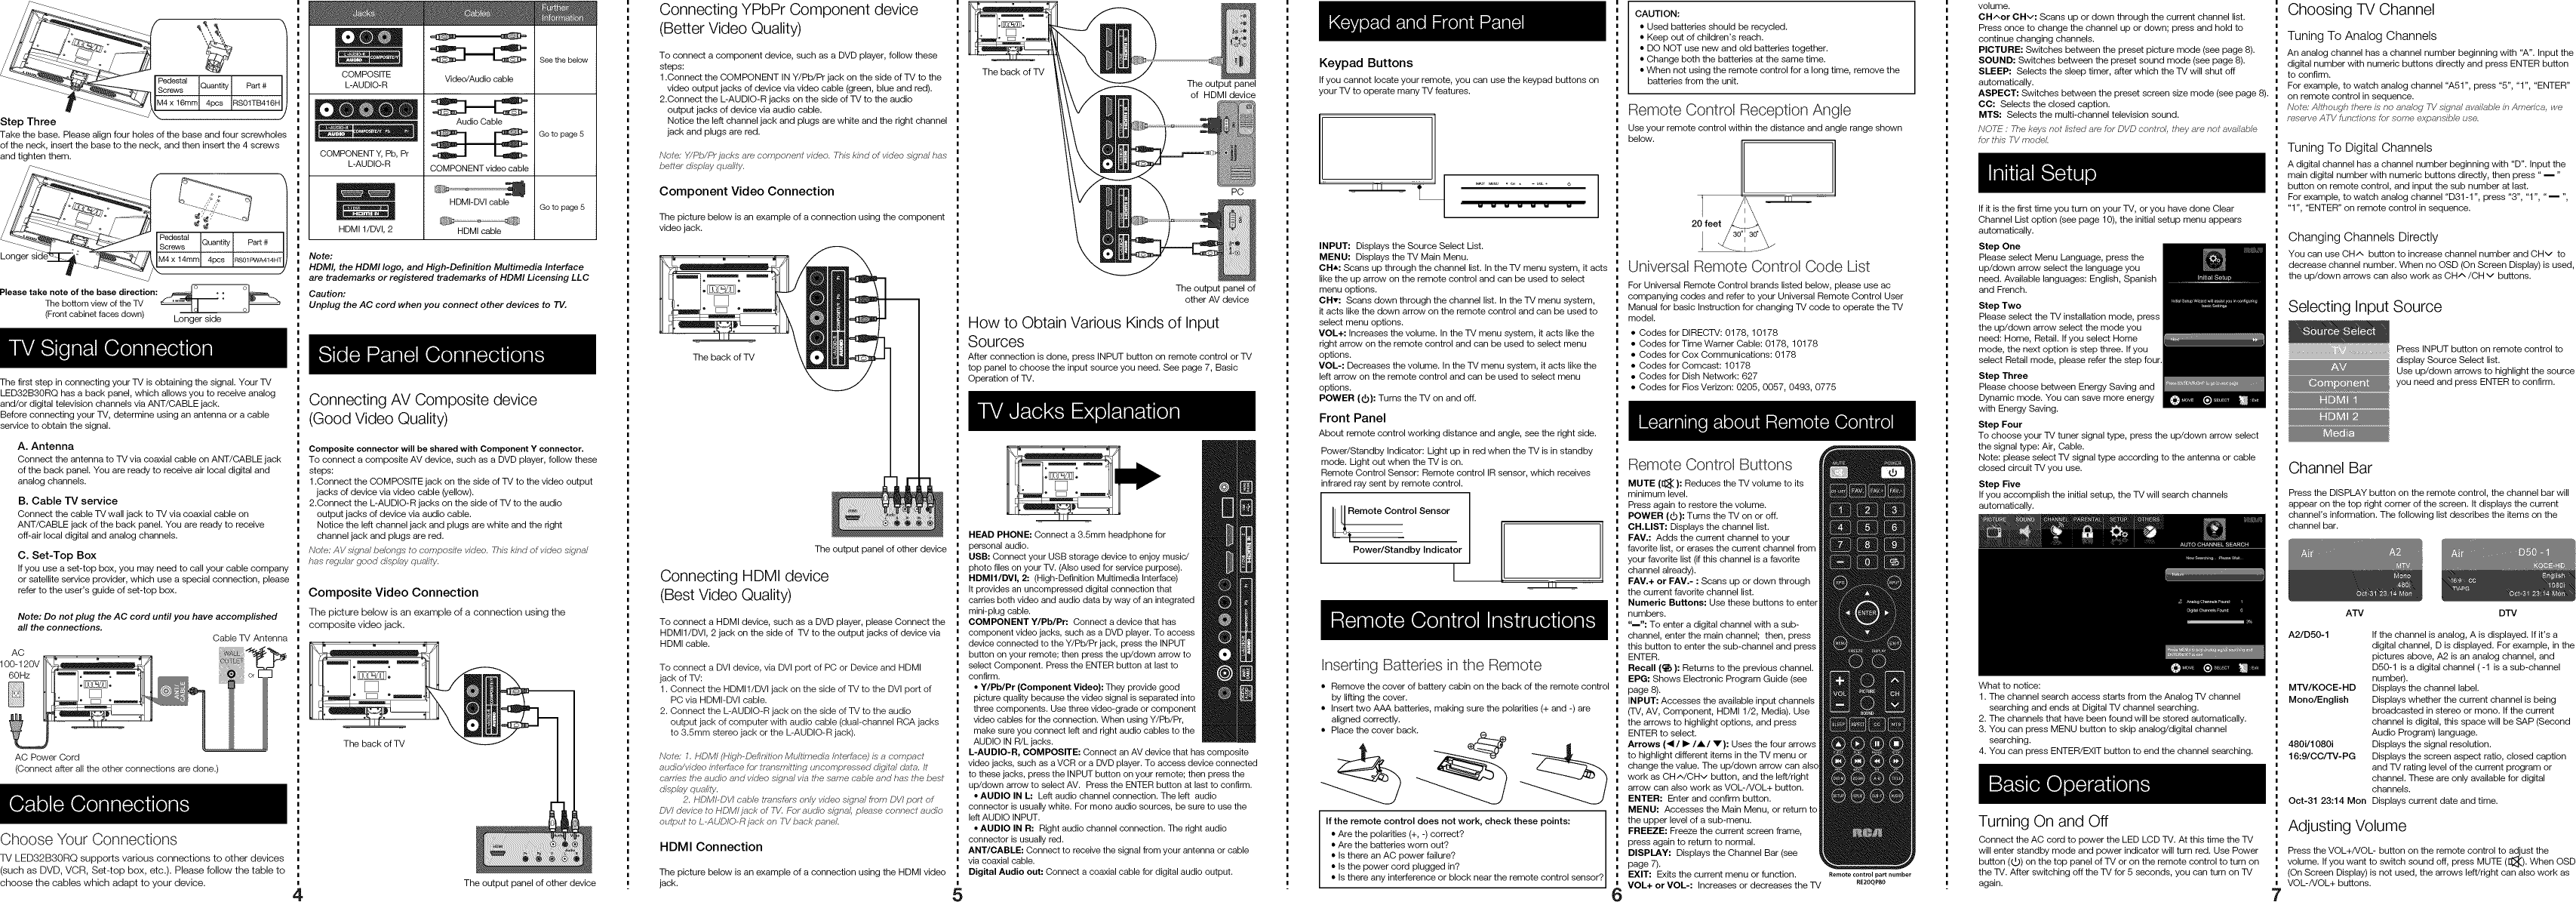 Page 2 of 4 - RCA LED32B30RQ User Manual  LED TELEVISION - Manuals And Guides 1307005L